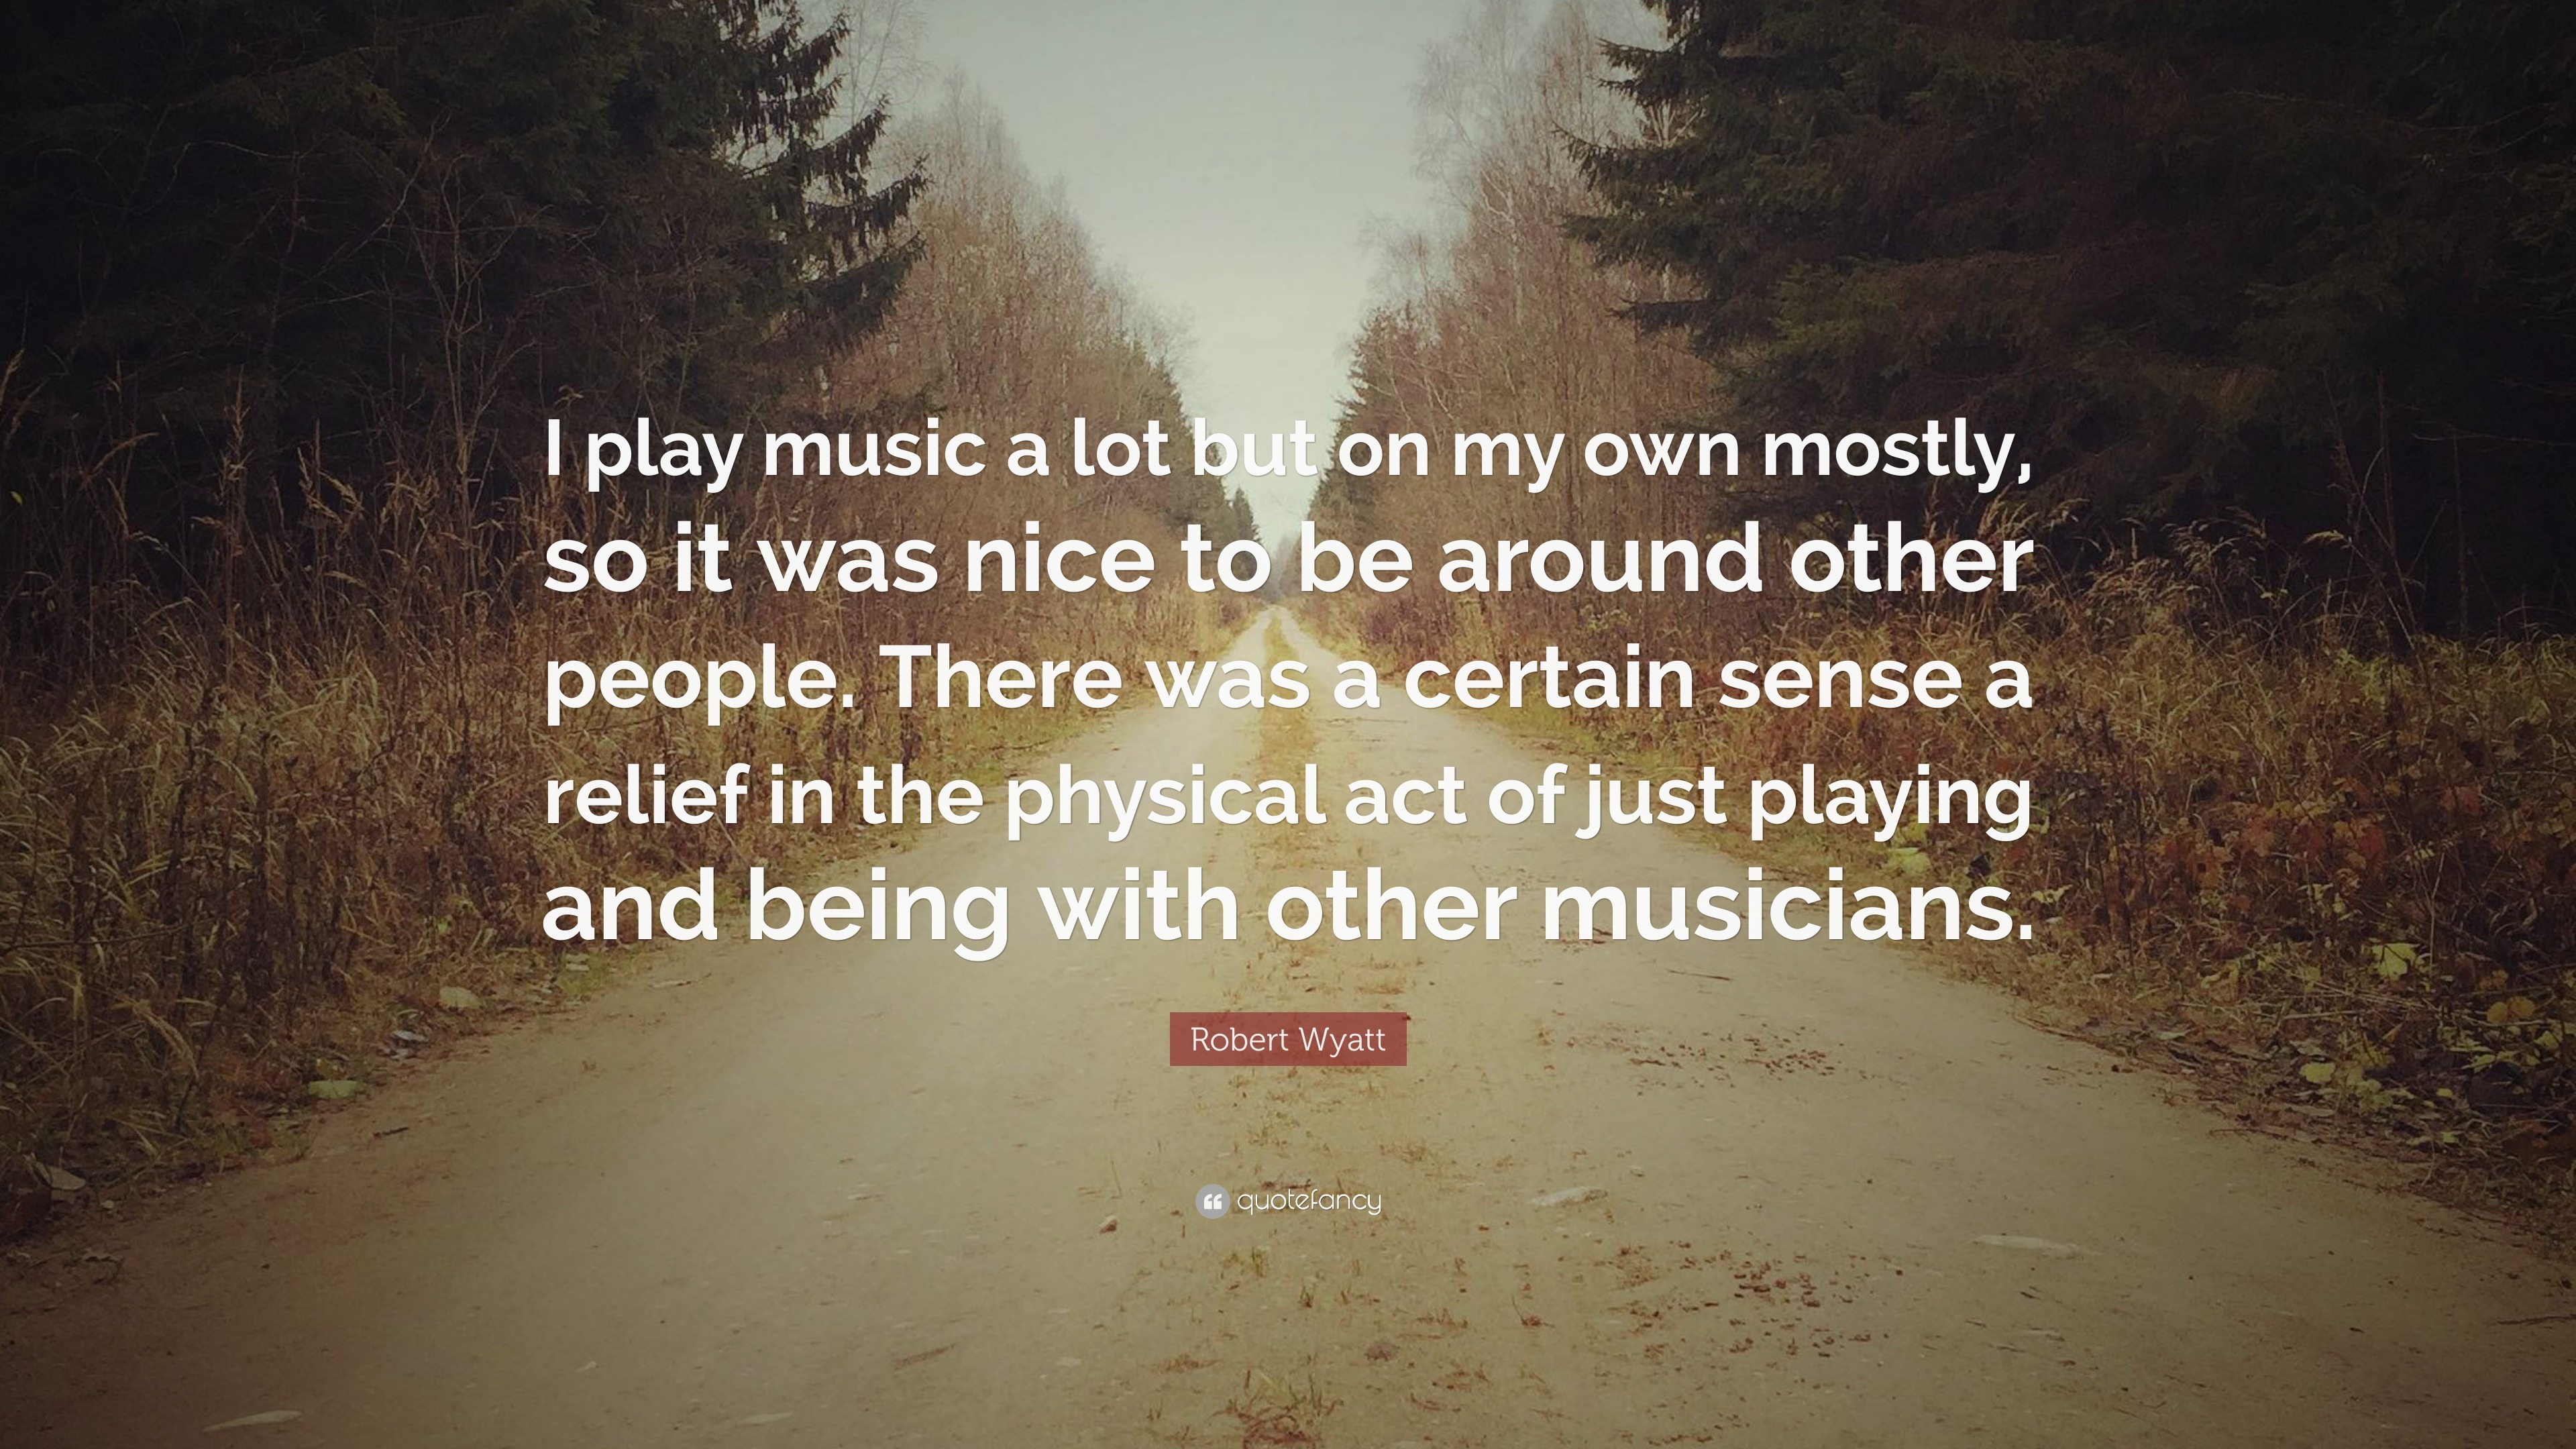 Robert Wyatt Quote: “I find it hard to take rock groups very